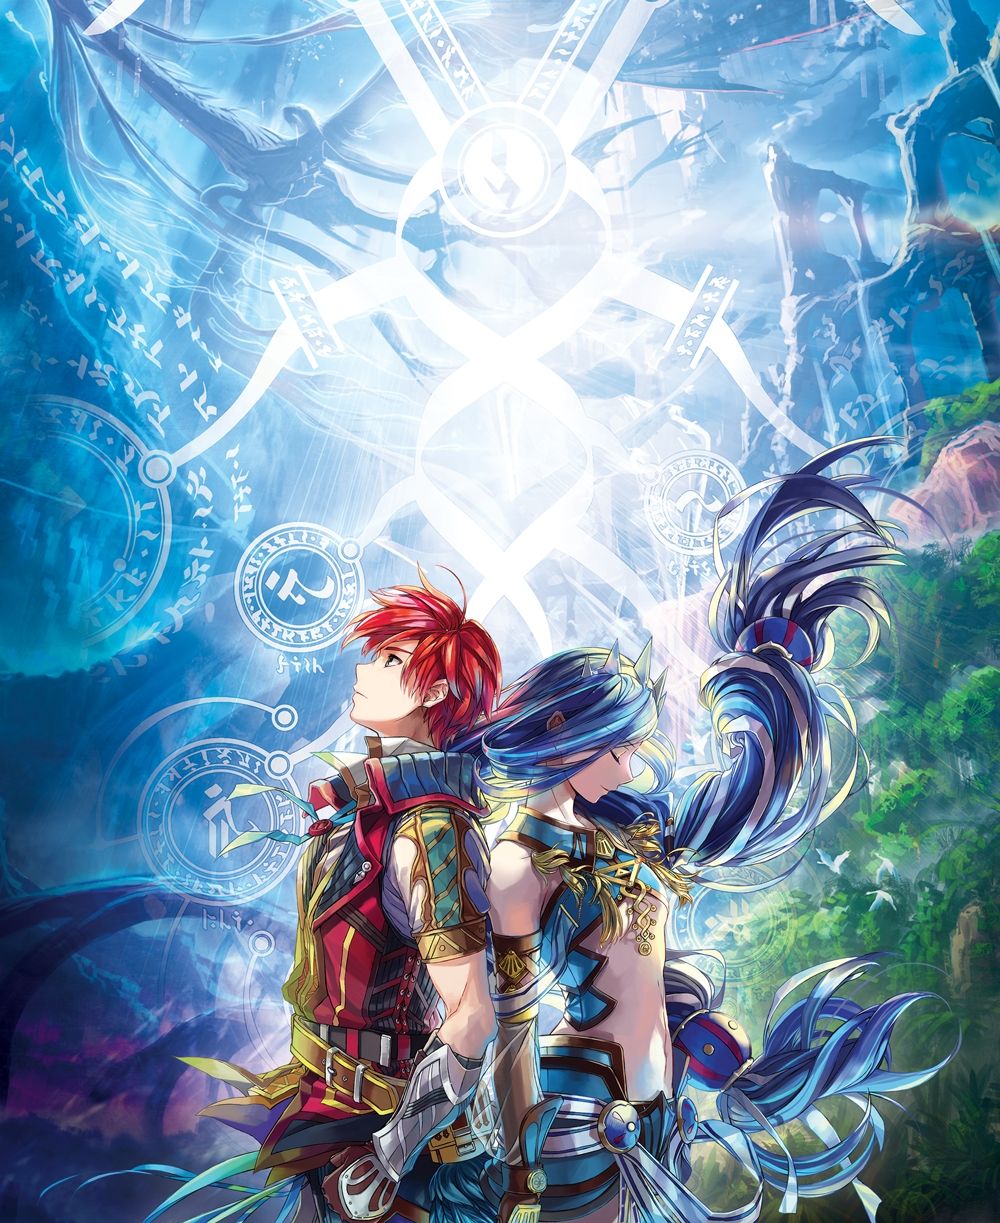 Picture Ys Ys II Complete vdeo game